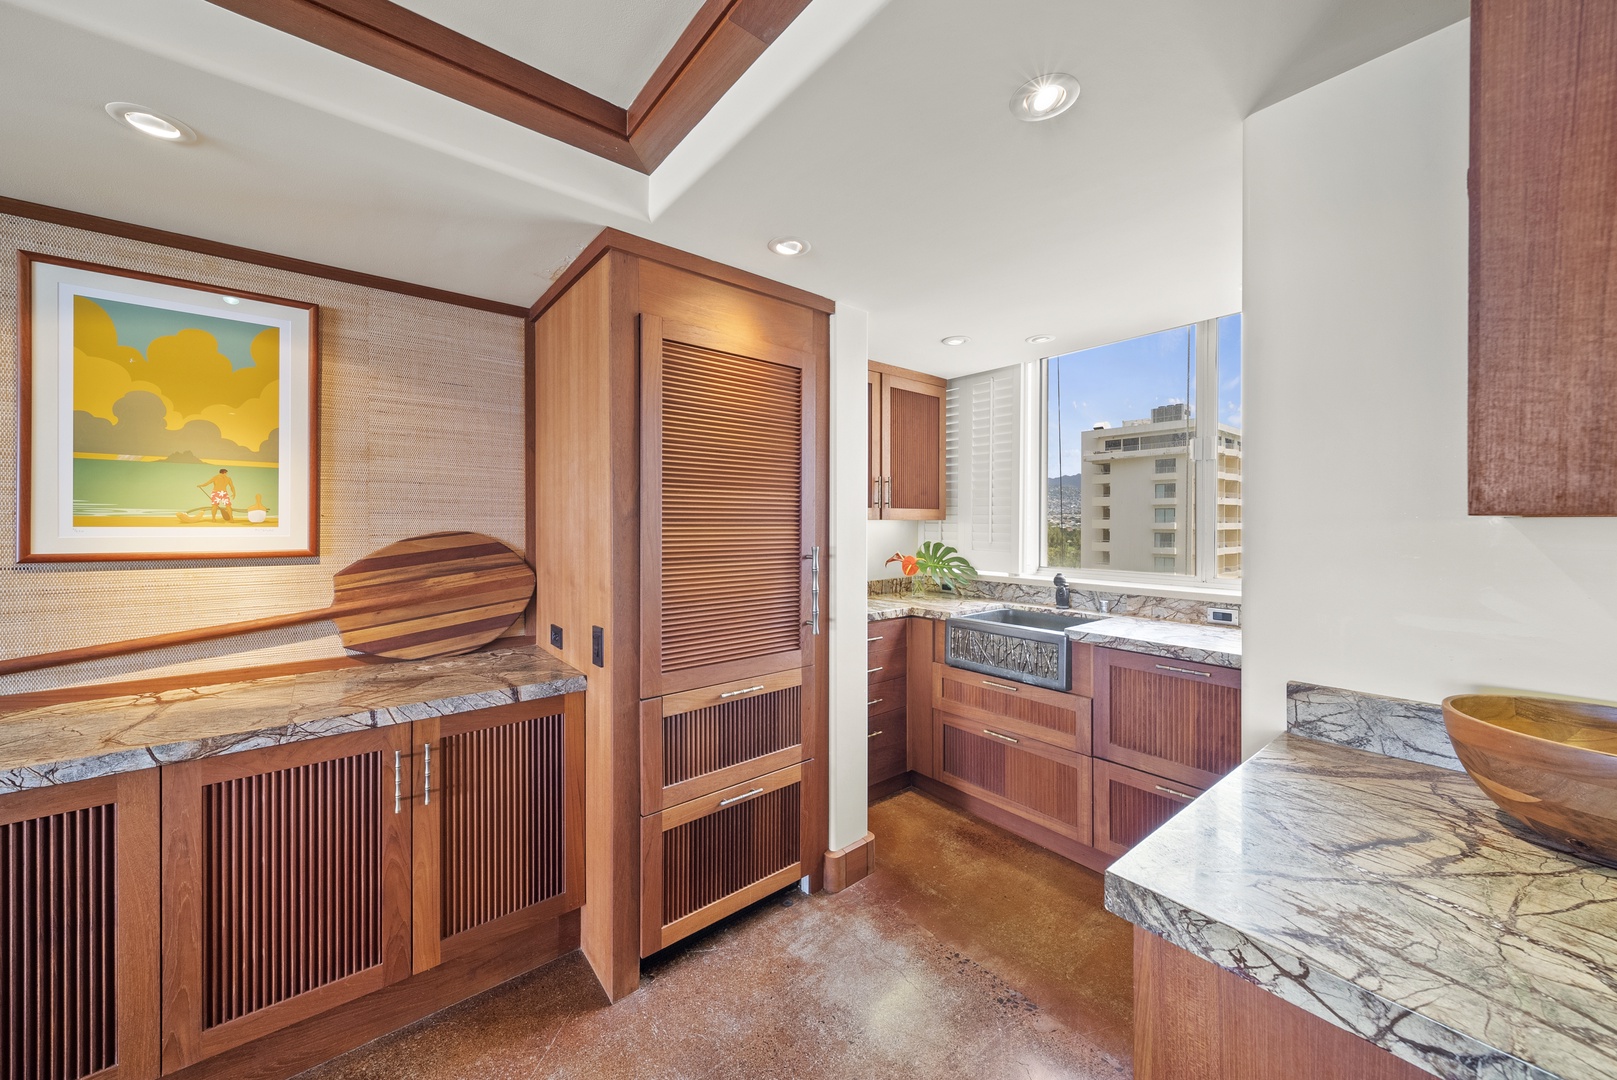 Honolulu Vacation Rentals, Diamond Head Sunset - The kitchen boasts top-of-the-line appliances such as SubZero, Bosch, Gaggenau, Miele, Fisher, and Pavkel